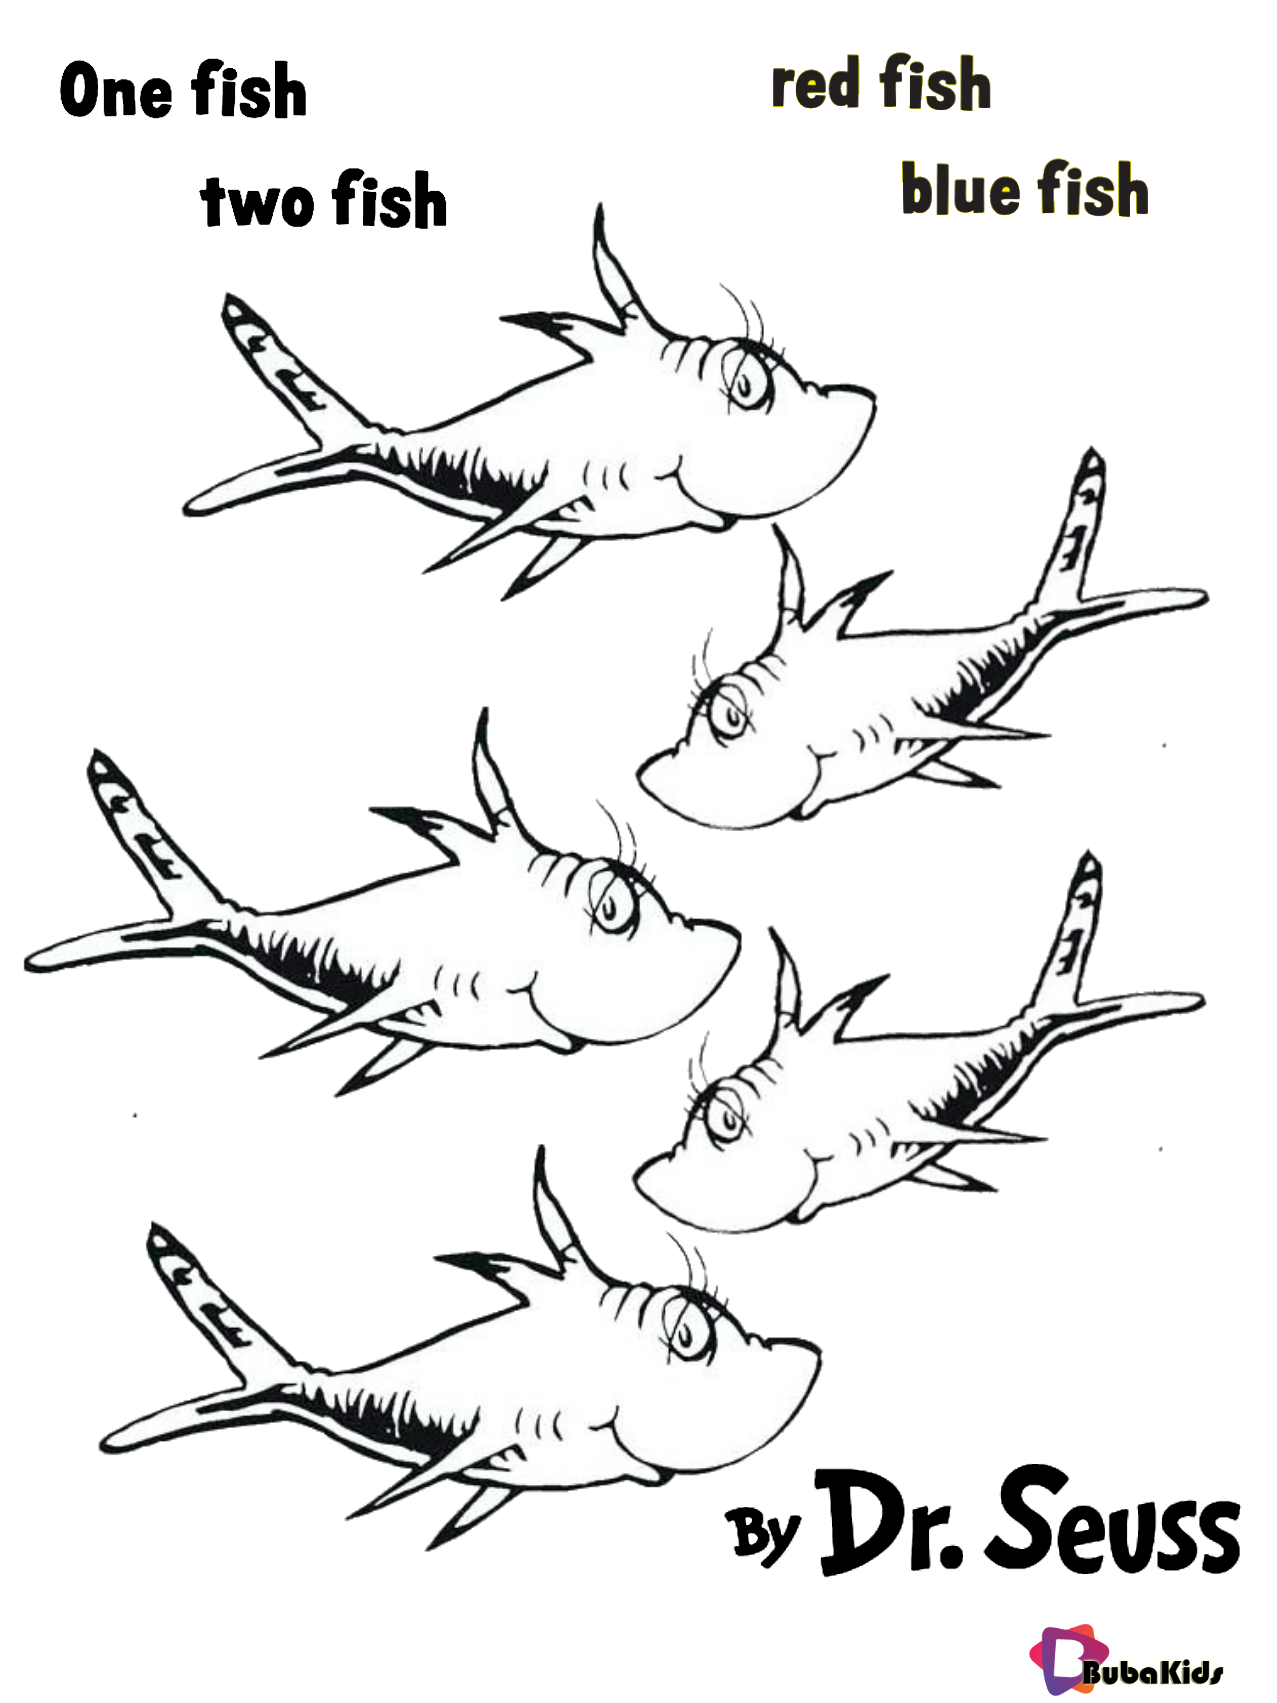 Dr seuss one fish two fish red fish blue fish coloring pages Wallpaper